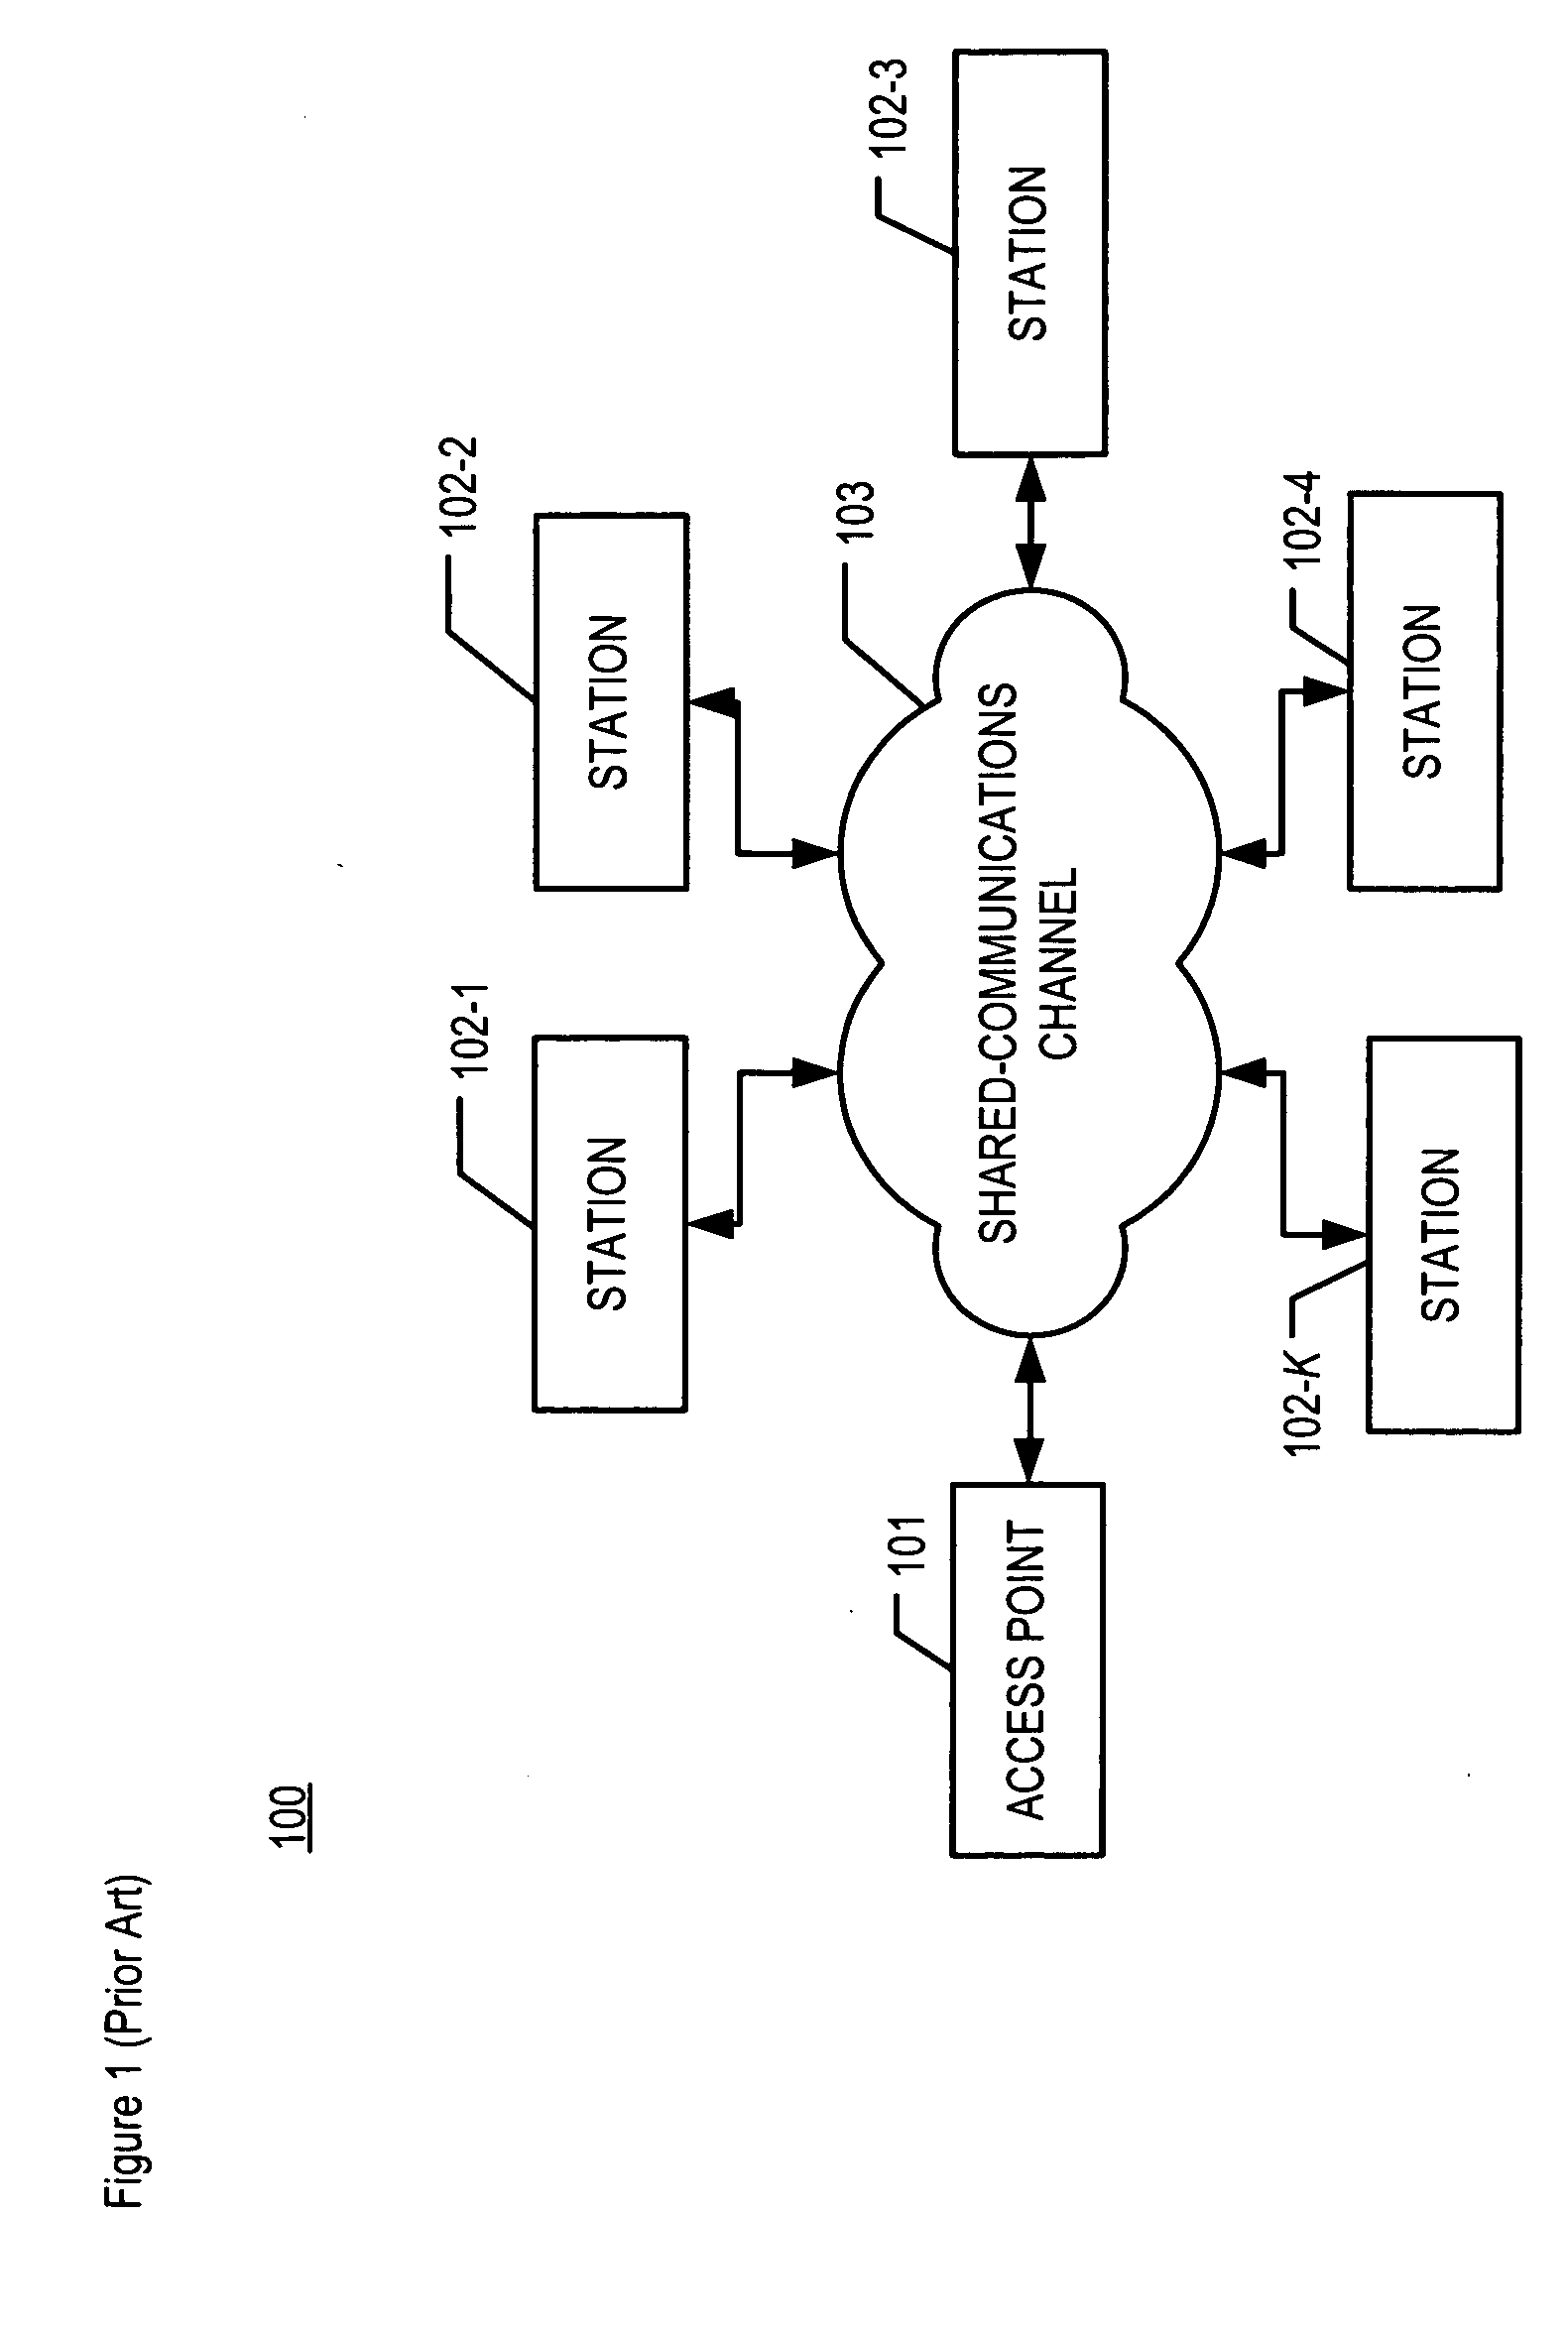 Managing an access point in the presence of separate protocols that share the same communications channel